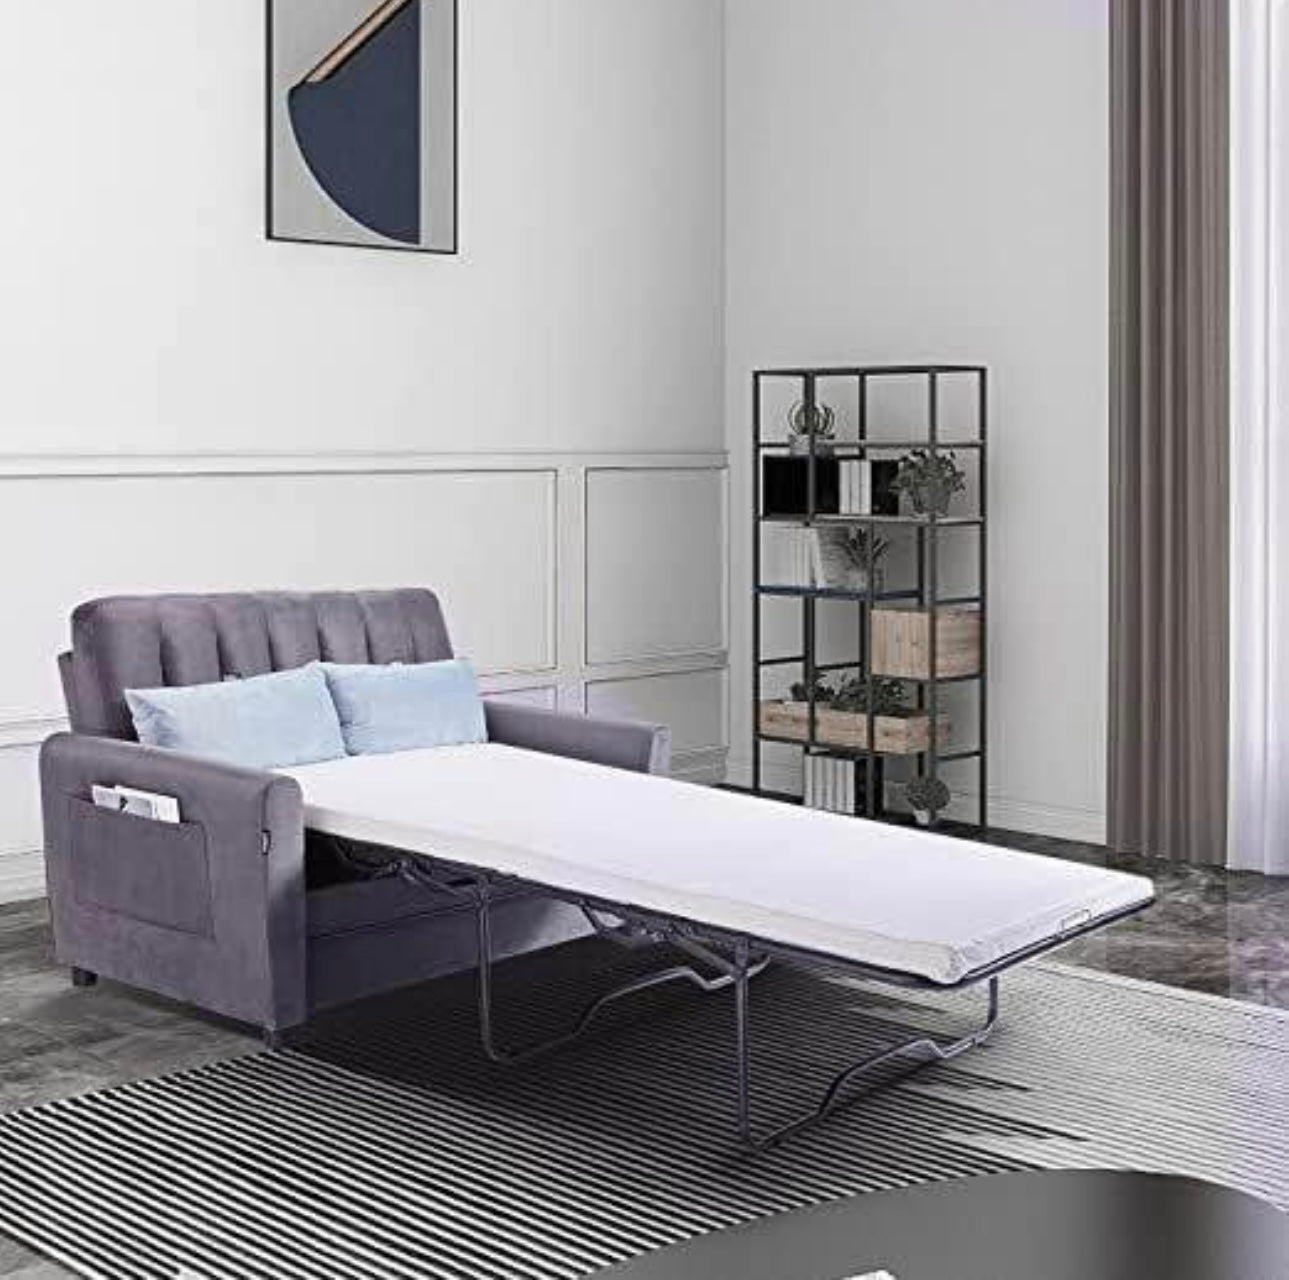 55” Pull-out sofa bed sofa bed double sofa bed with memory foam mattress bed, velvet gray